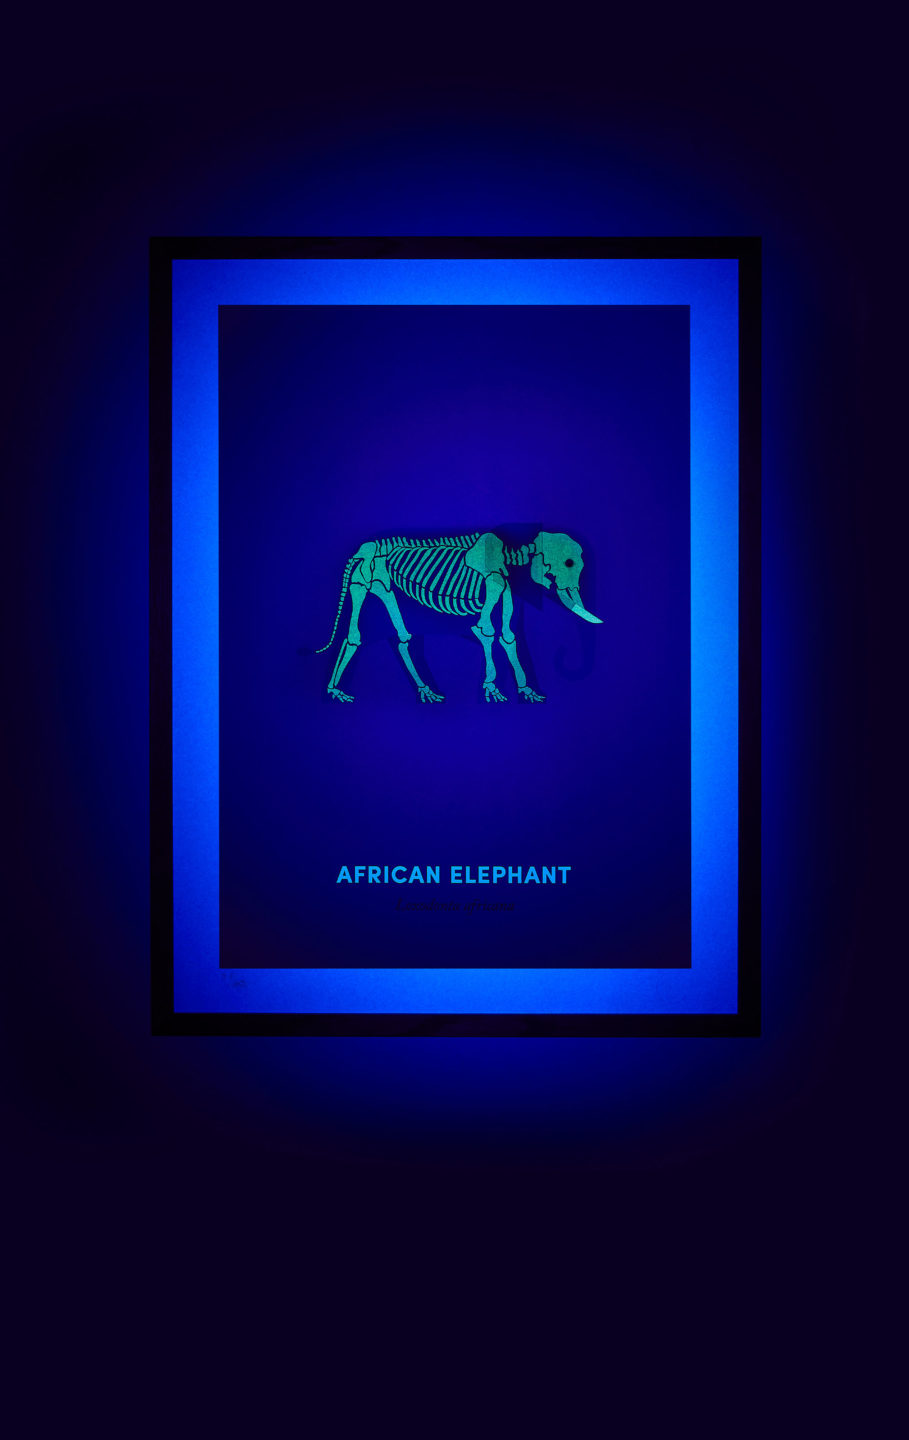 African Elephant screen print under UV light - shown on hover